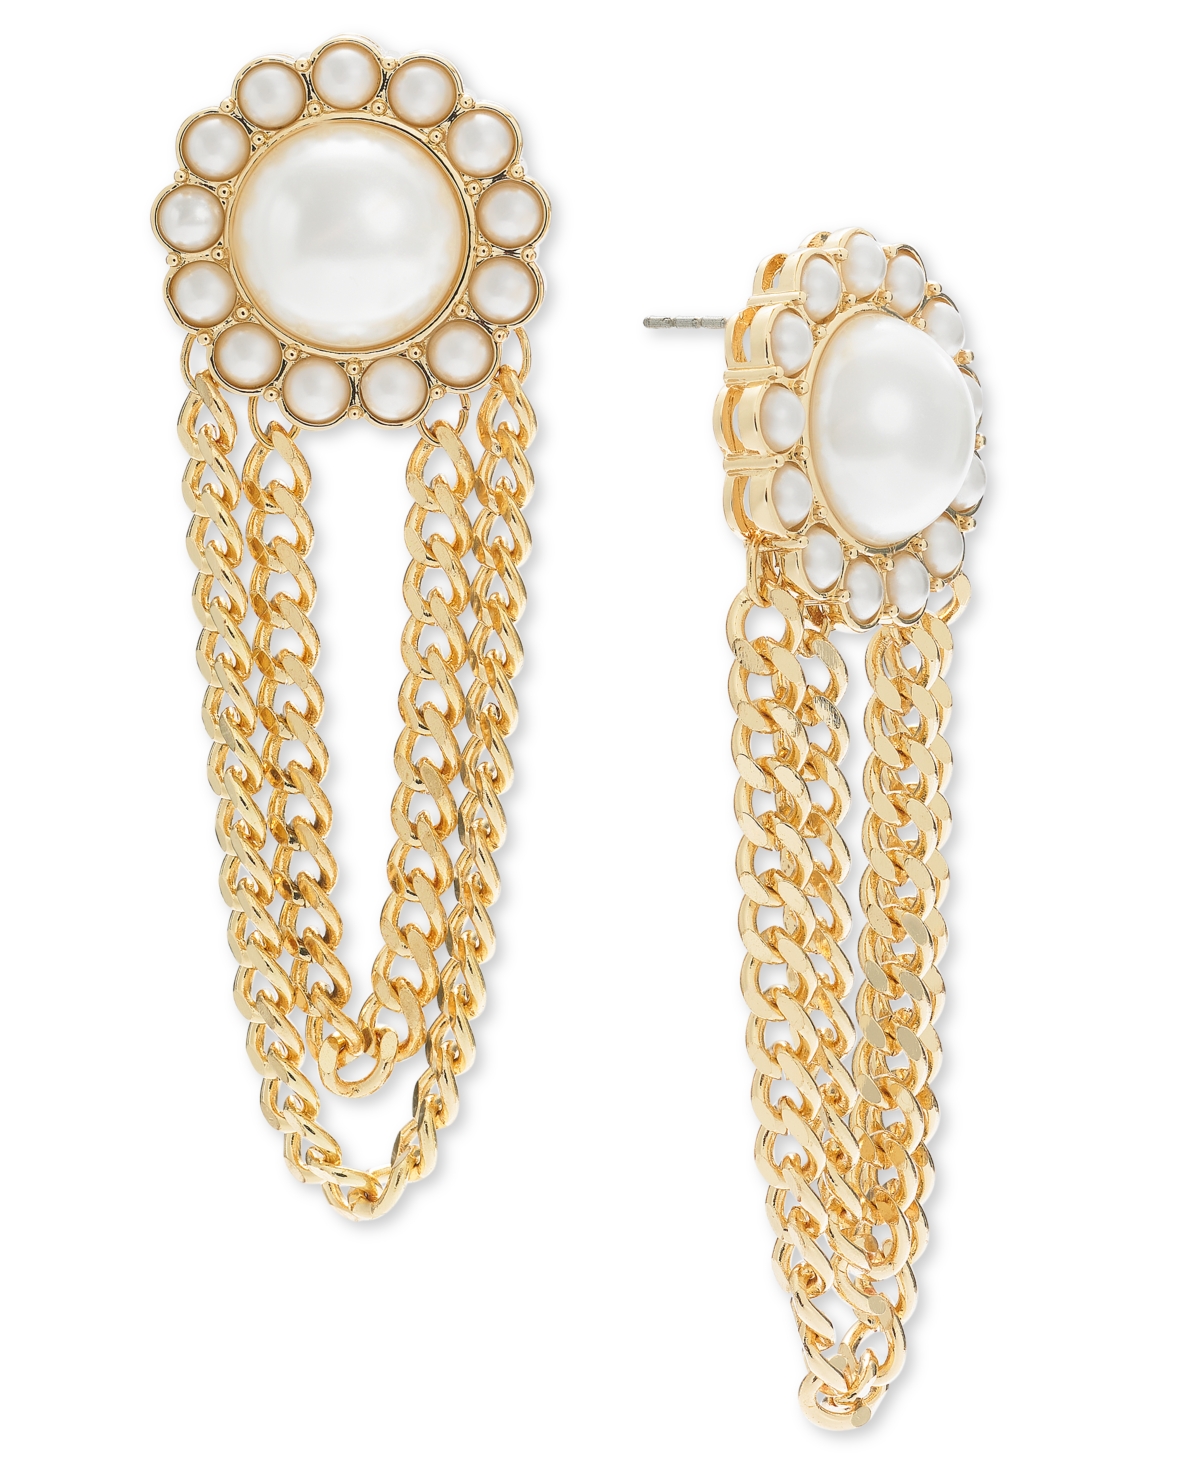 Gold-Tone Imitation Pearl Chain Drop Earrings, Created for Macy's - Gold